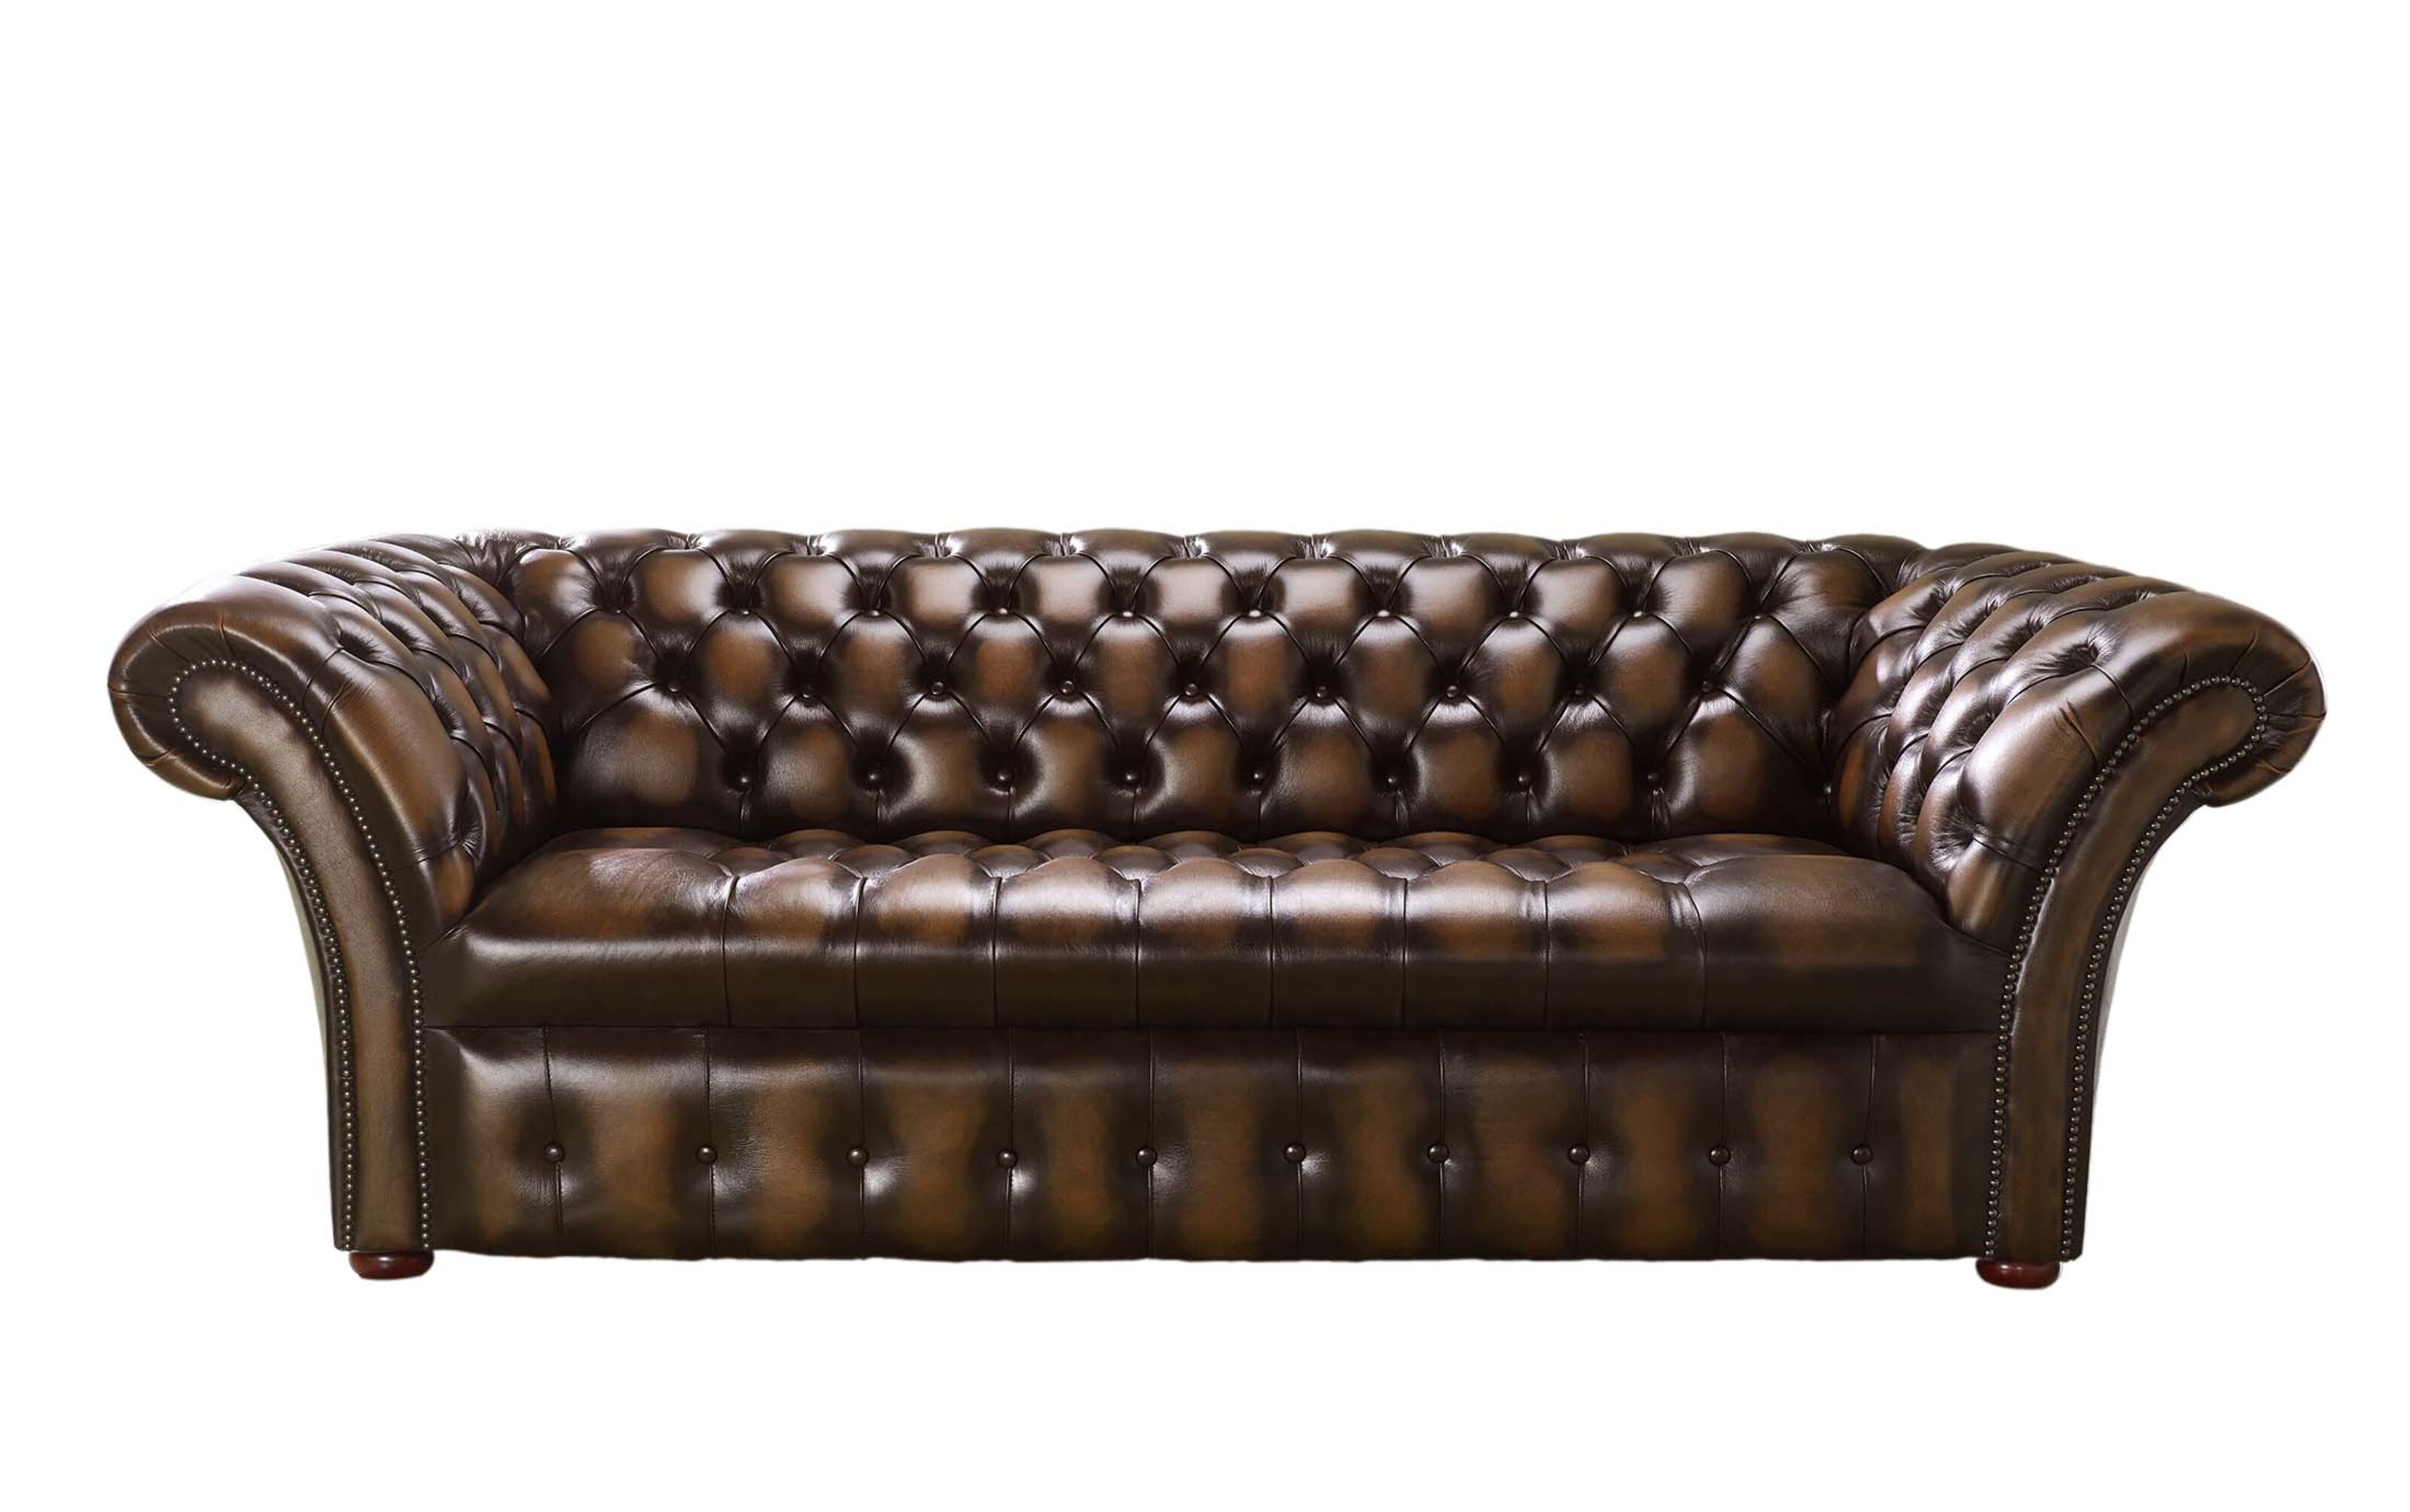 Elevate Your Hotel with Luxurious Chesterfield Sofas  %Post Title